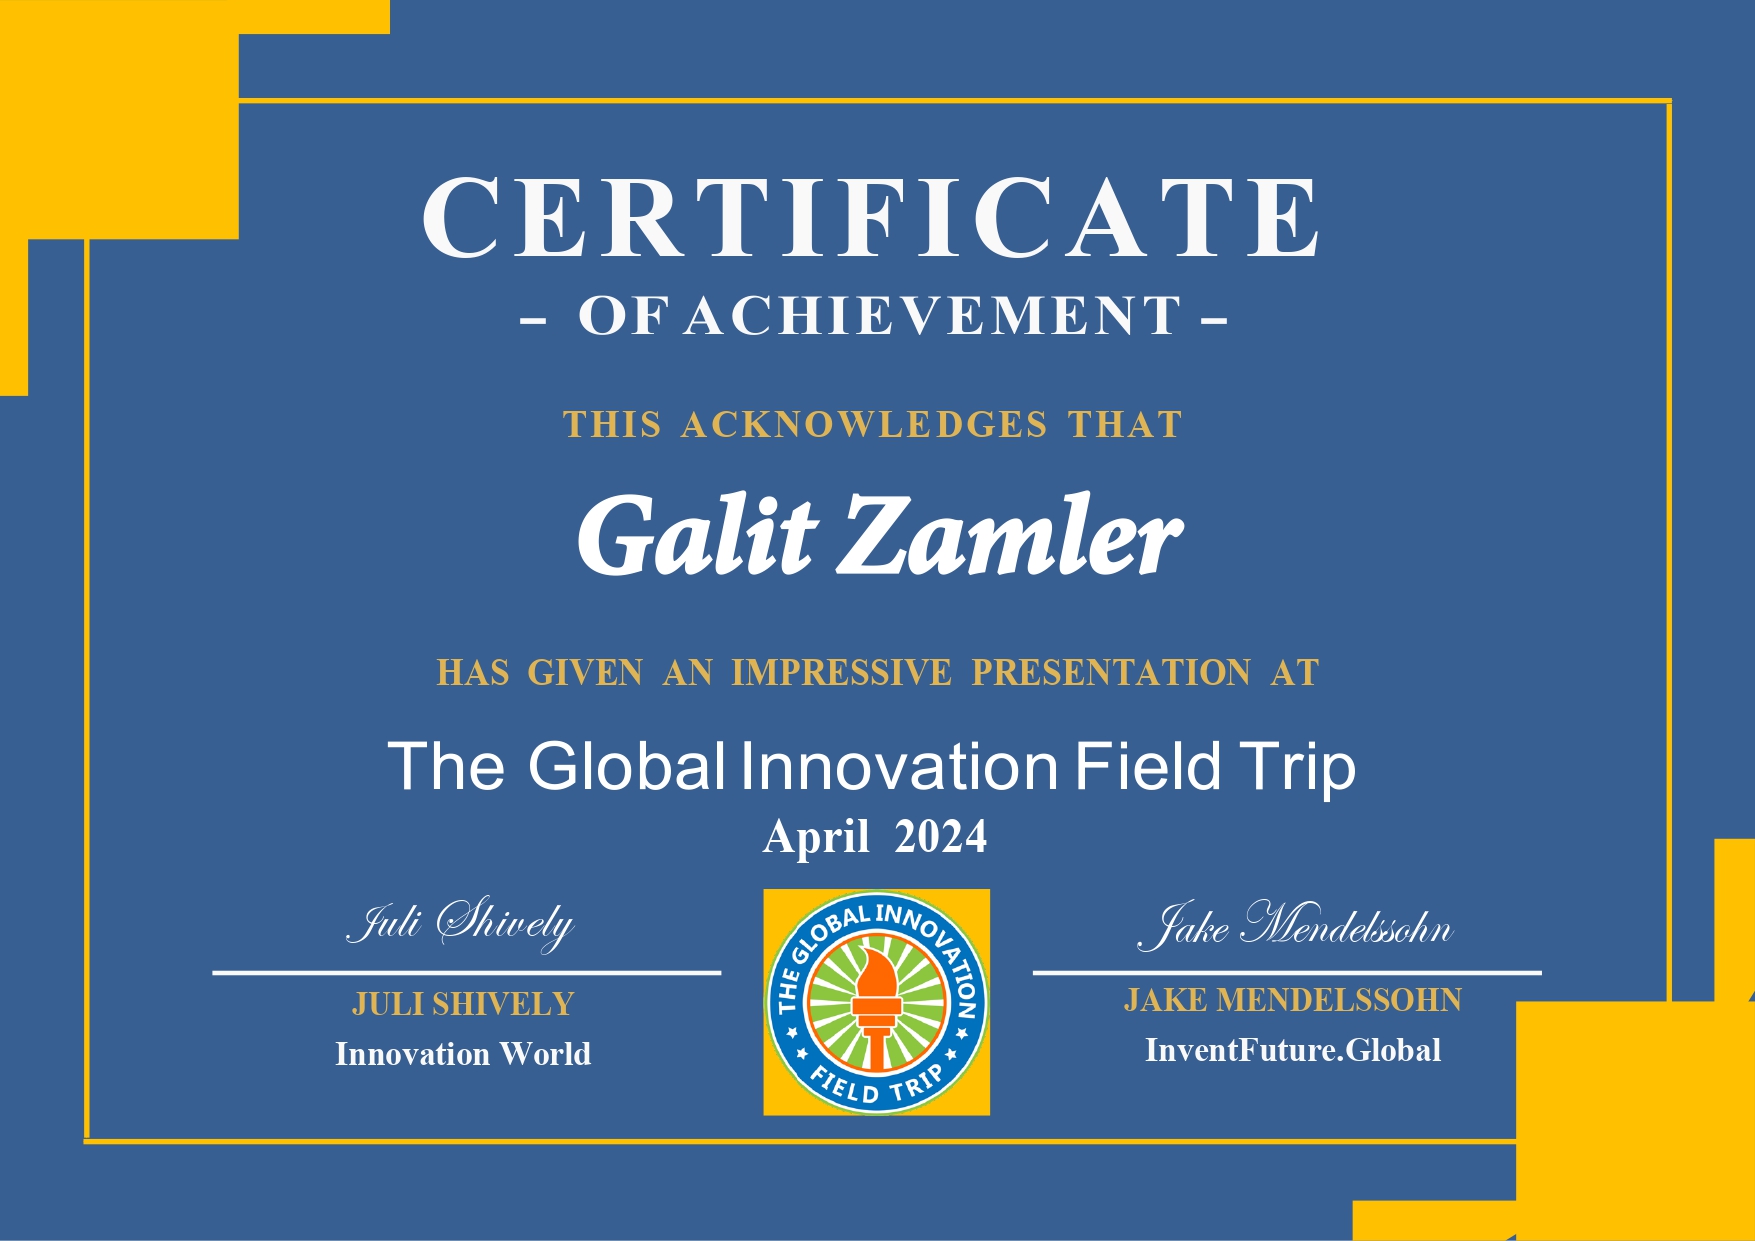 Galit Zamler is part of GIFT to encourage entrepreneurship among children and youth from all over the world.